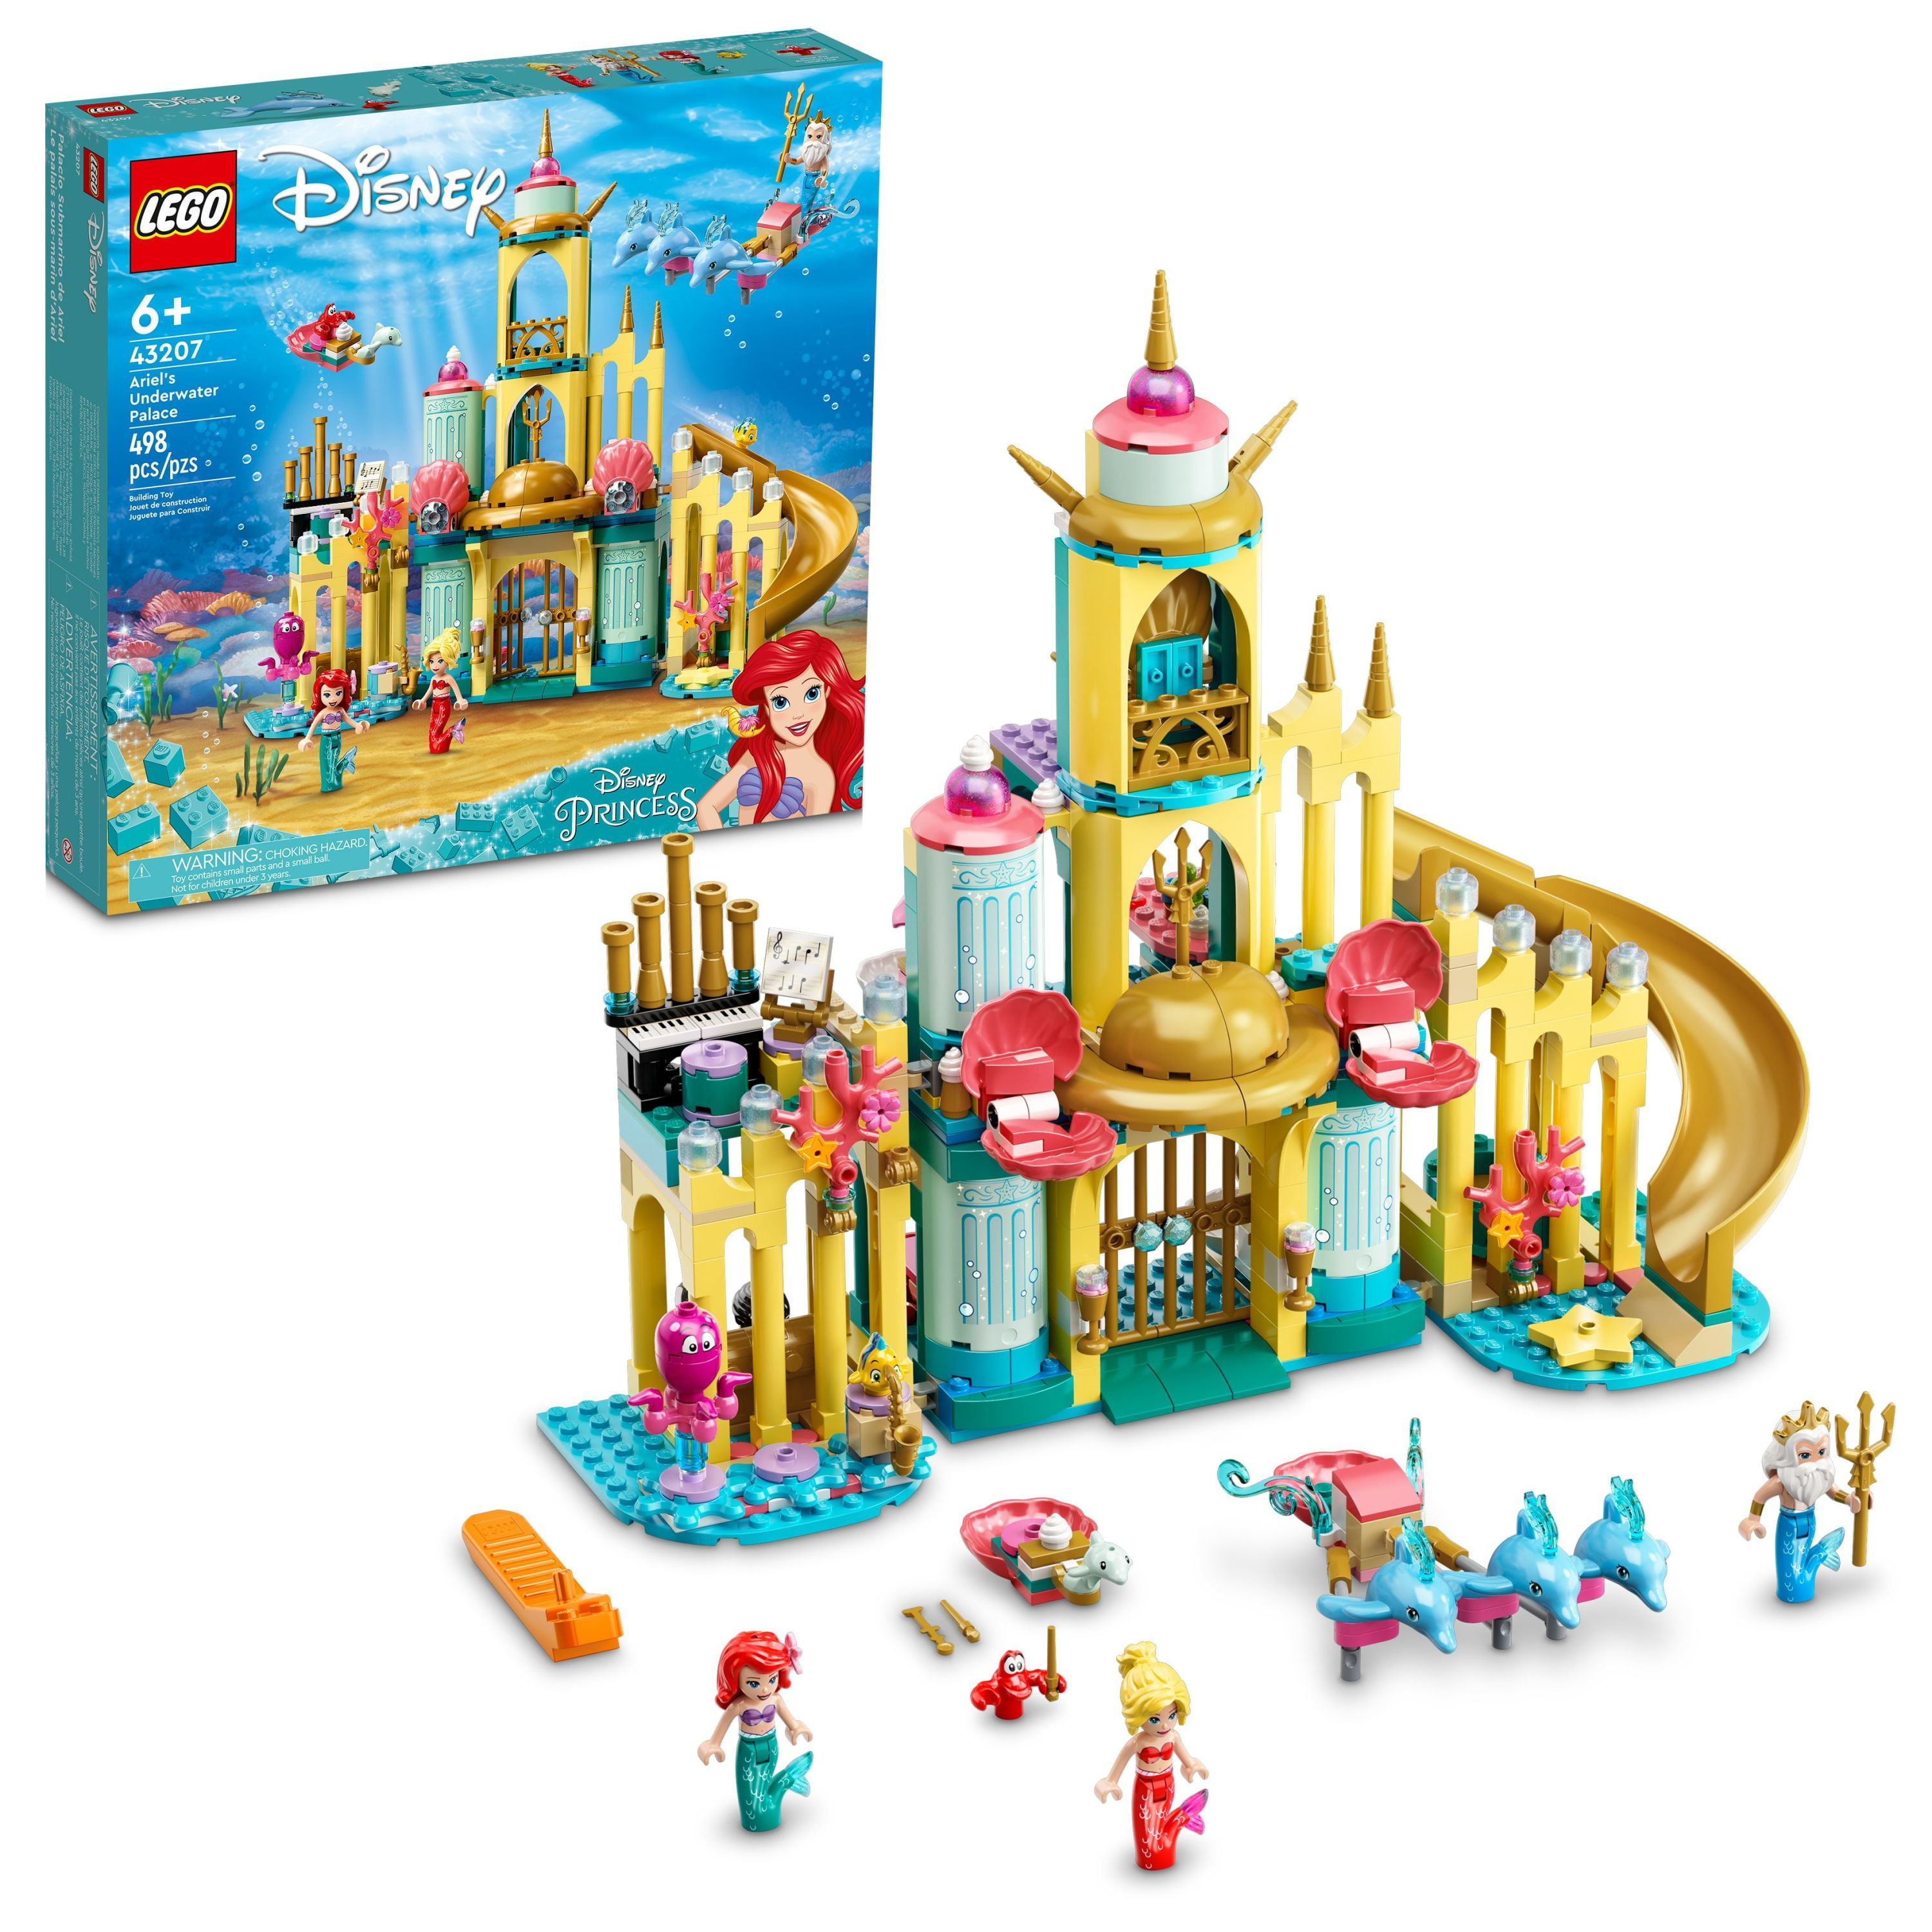 Wijzerplaat Verbanning Afdeling LEGO Disney Princess Ariel's Underwater Palace 43207, Buildable Castle Toy,  Present Idea for Kids, Girls and Boys Aged 6+ with The Little Mermaid  Mini-Doll Figure & Dolphin Figures - Walmart.com